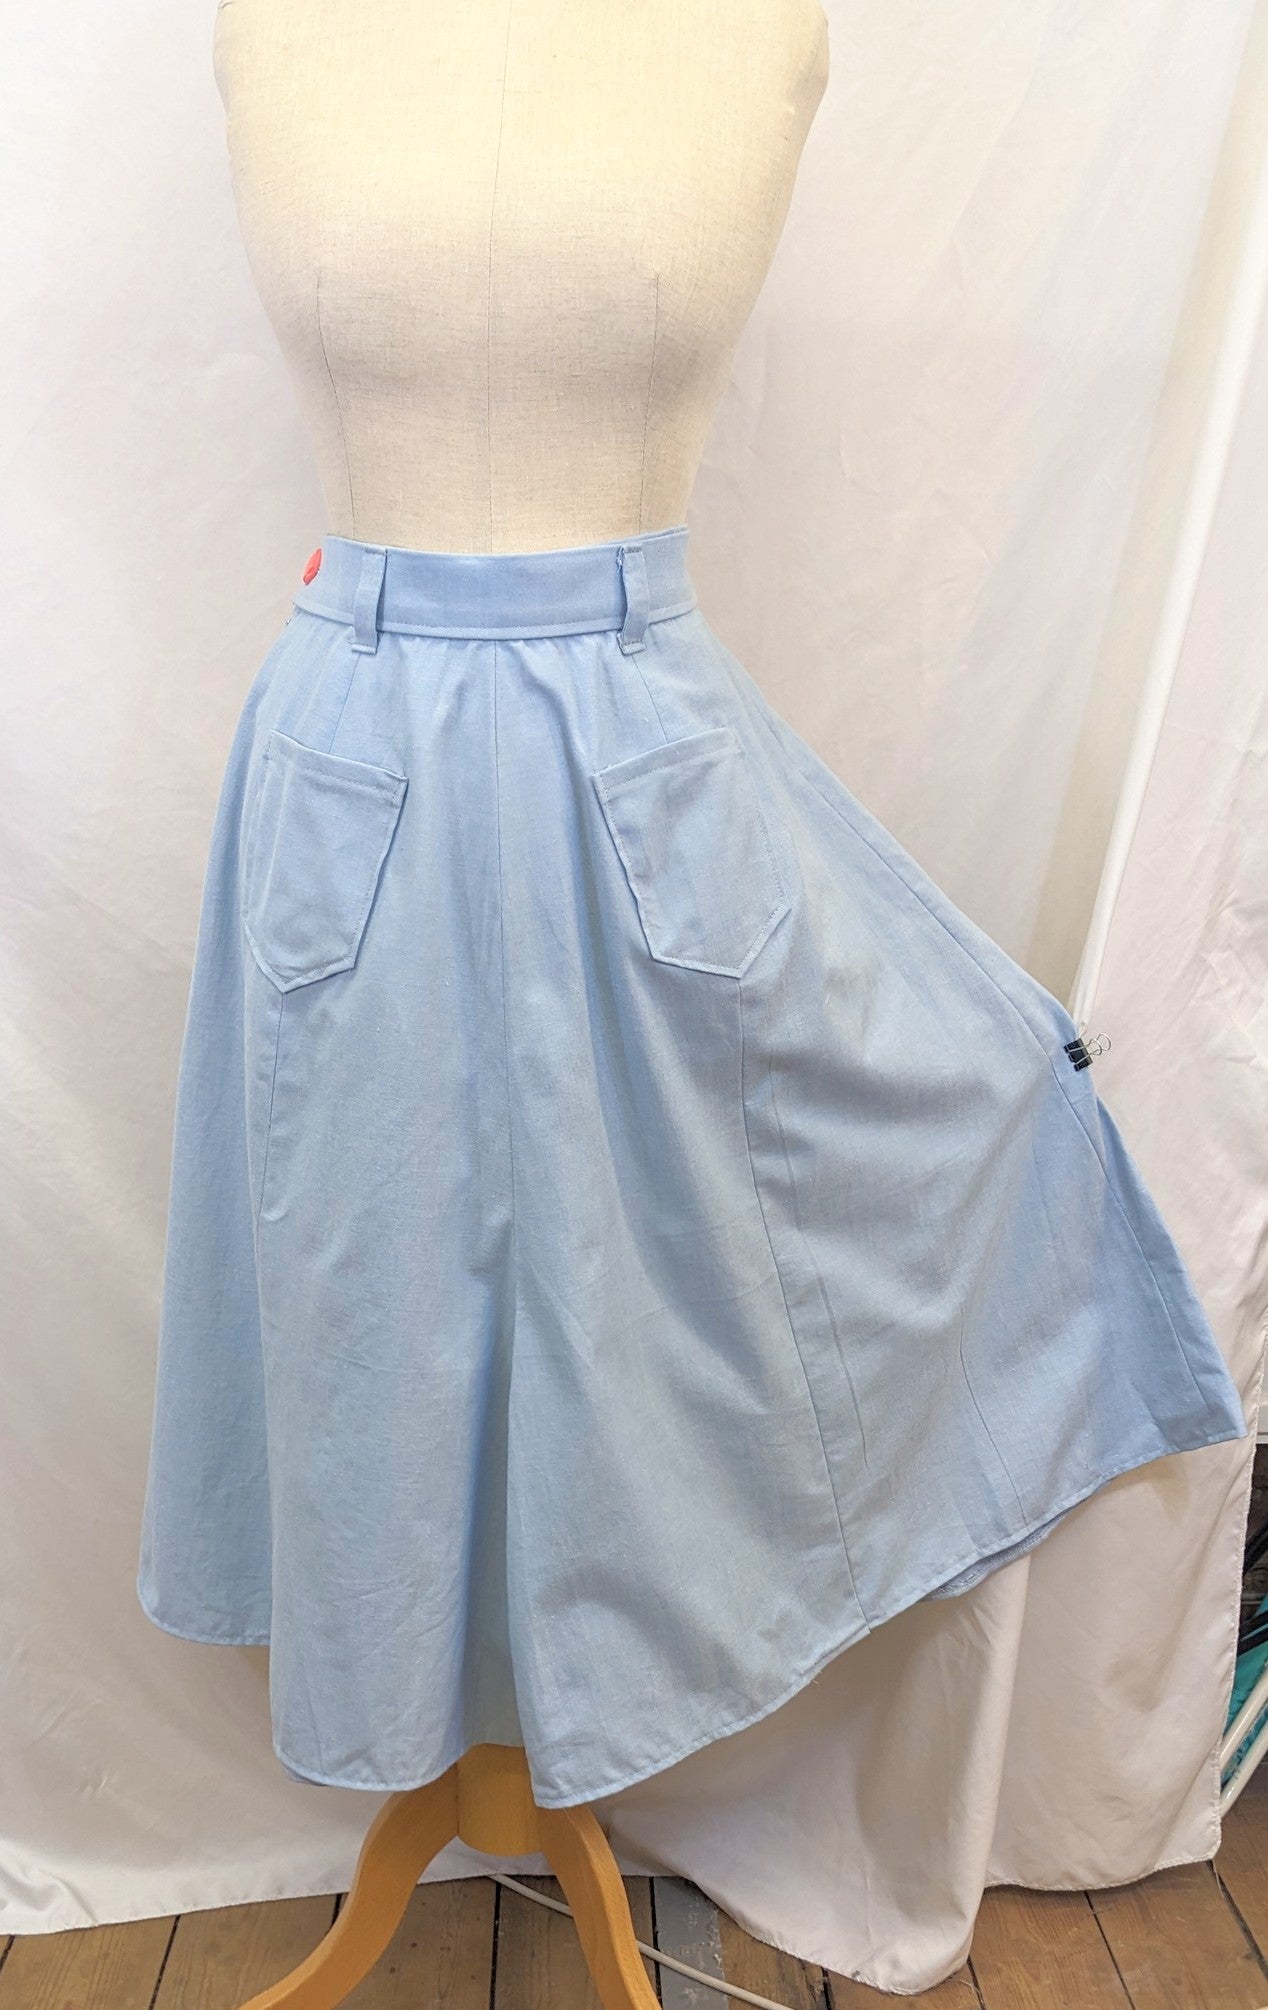 "Marnie" 1930s Inspired Culottes Pattern Printed